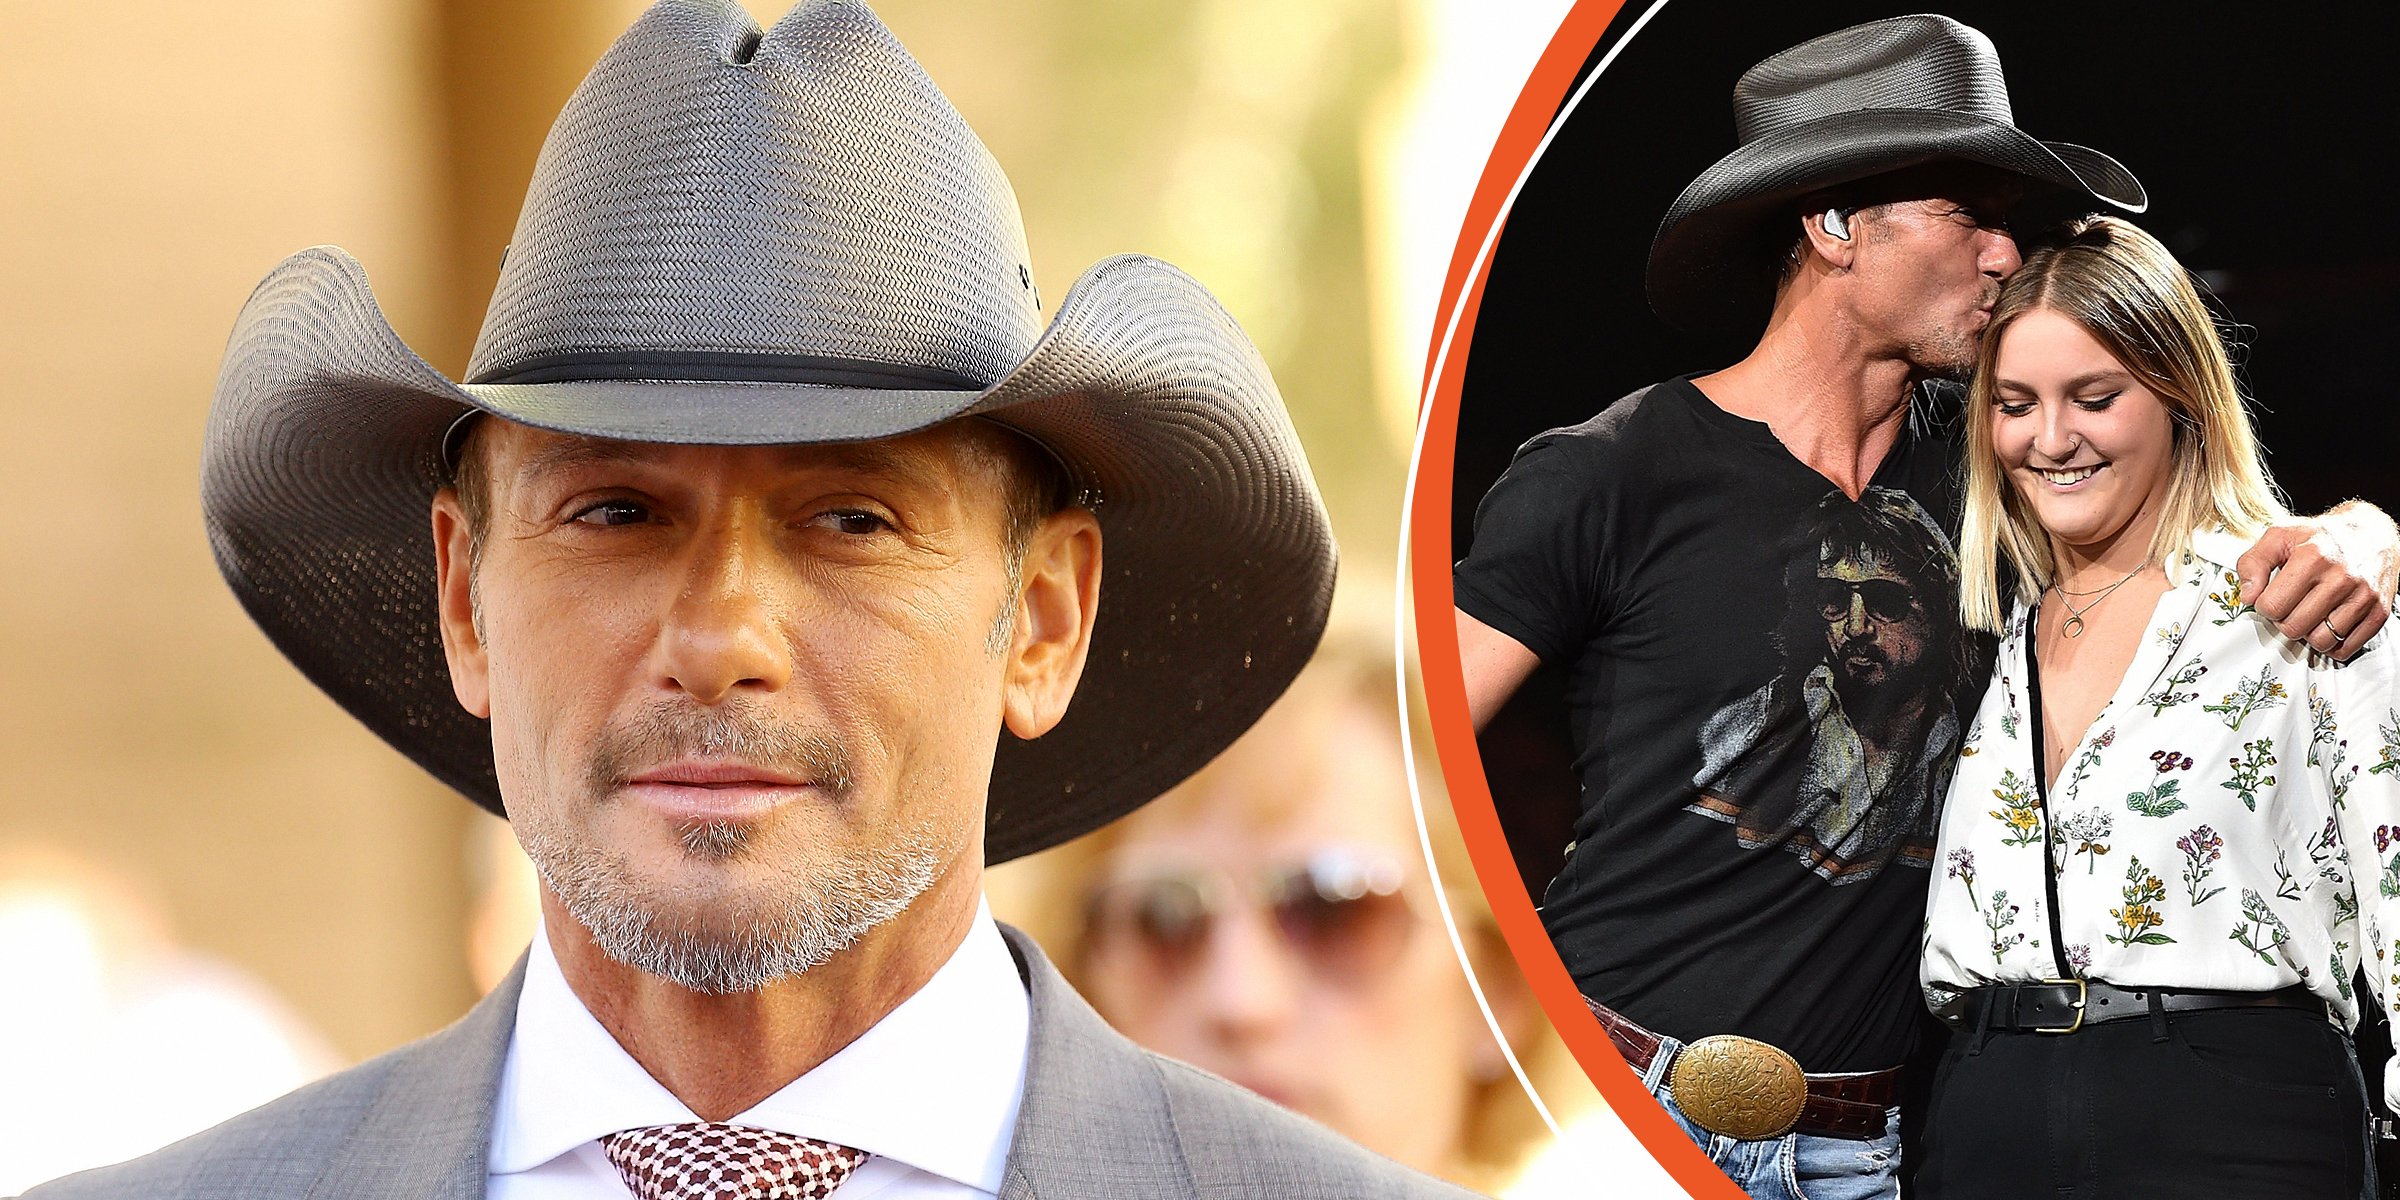 Tim McGraw’s Now ‘Skinny’ Daughter Shows ‘Fantastic’ Body